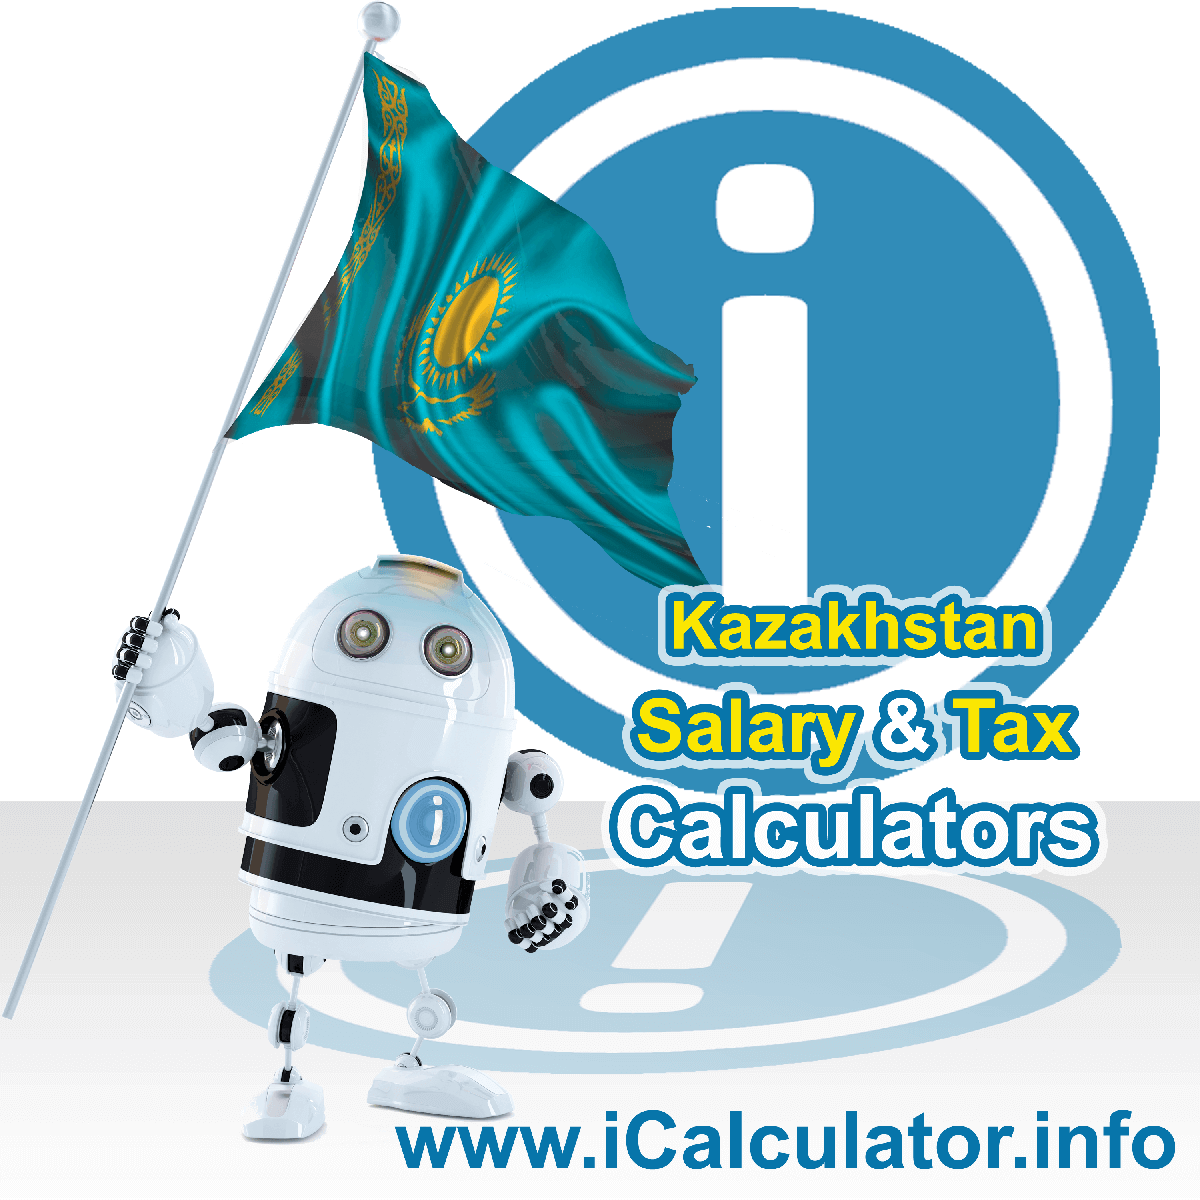 Kazakhstan Tax Calculator. This image shows the Kazakhstan flag and information relating to the tax formula for the Kazakhstan Salary Calculator